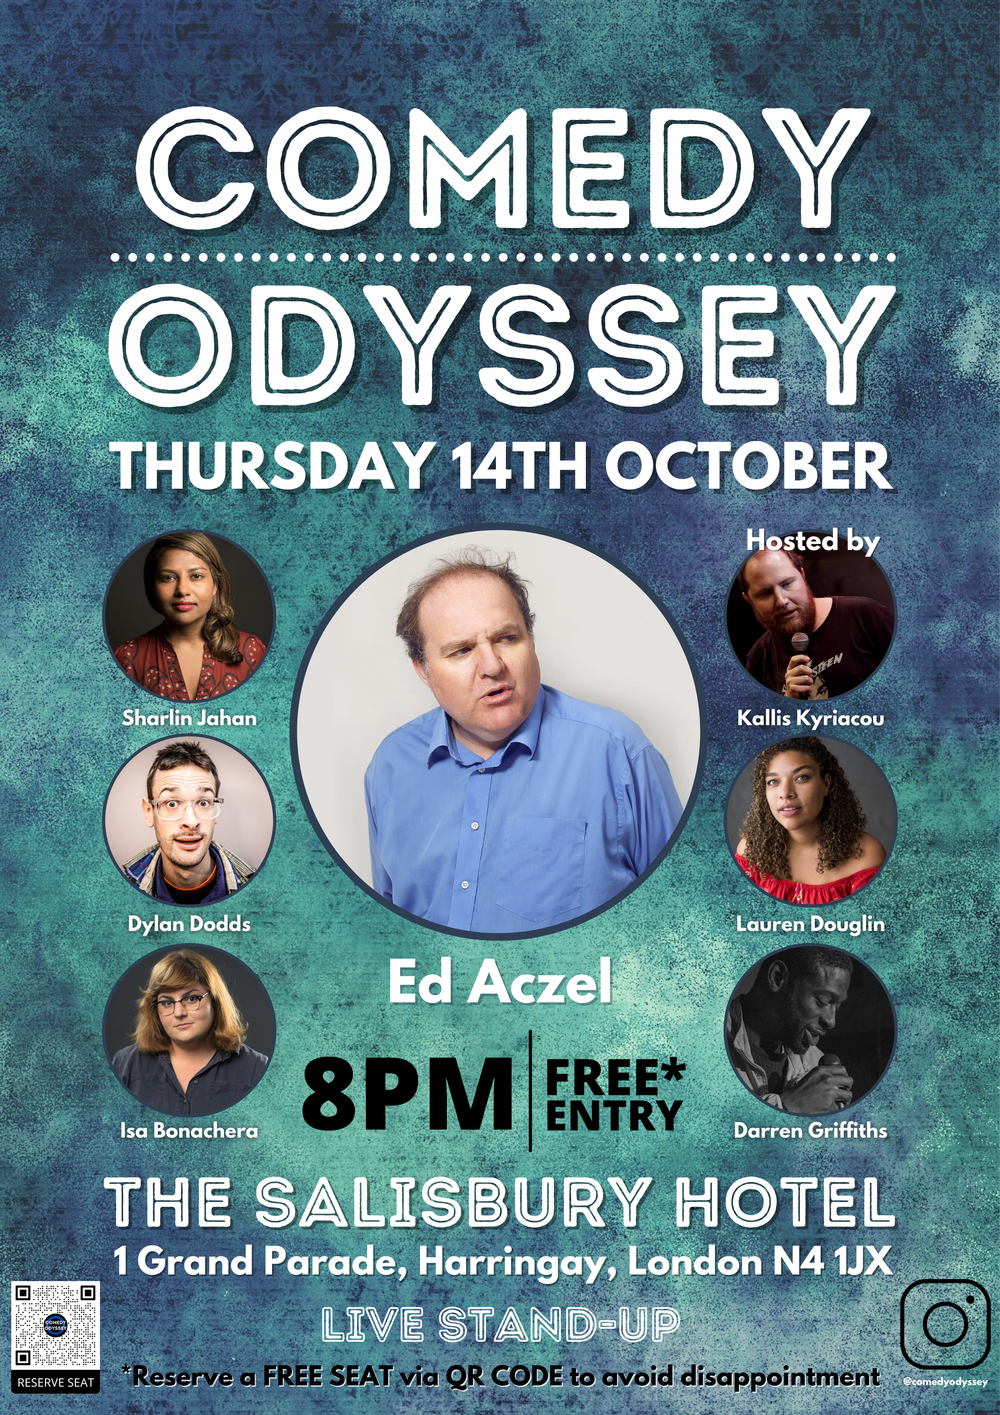 THE FOURTH COMEDY ODYSSEY SHOW. HEADLINED BY ED ACZEL. RESERVE A FREE TICKET: https://www.eventbrite.co.uk/e/184344327847